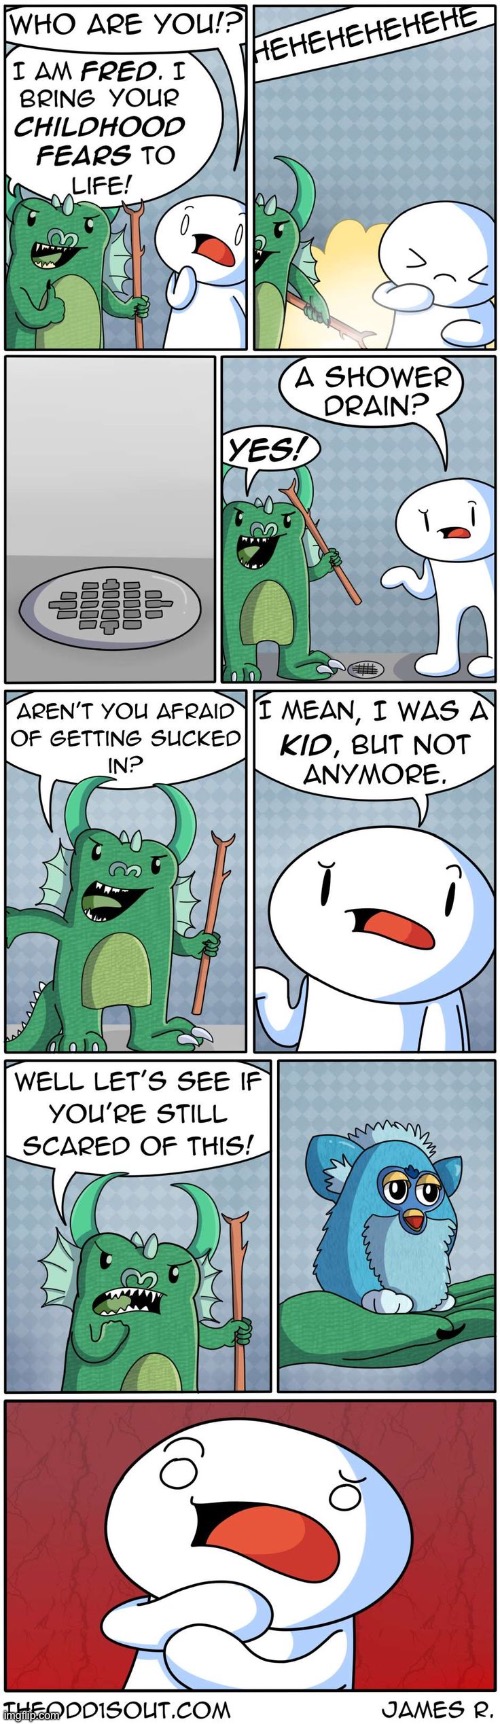 889 | image tagged in comics/cartoons,kids,fear,comics,theodd1sout,drain the swamp | made w/ Imgflip meme maker